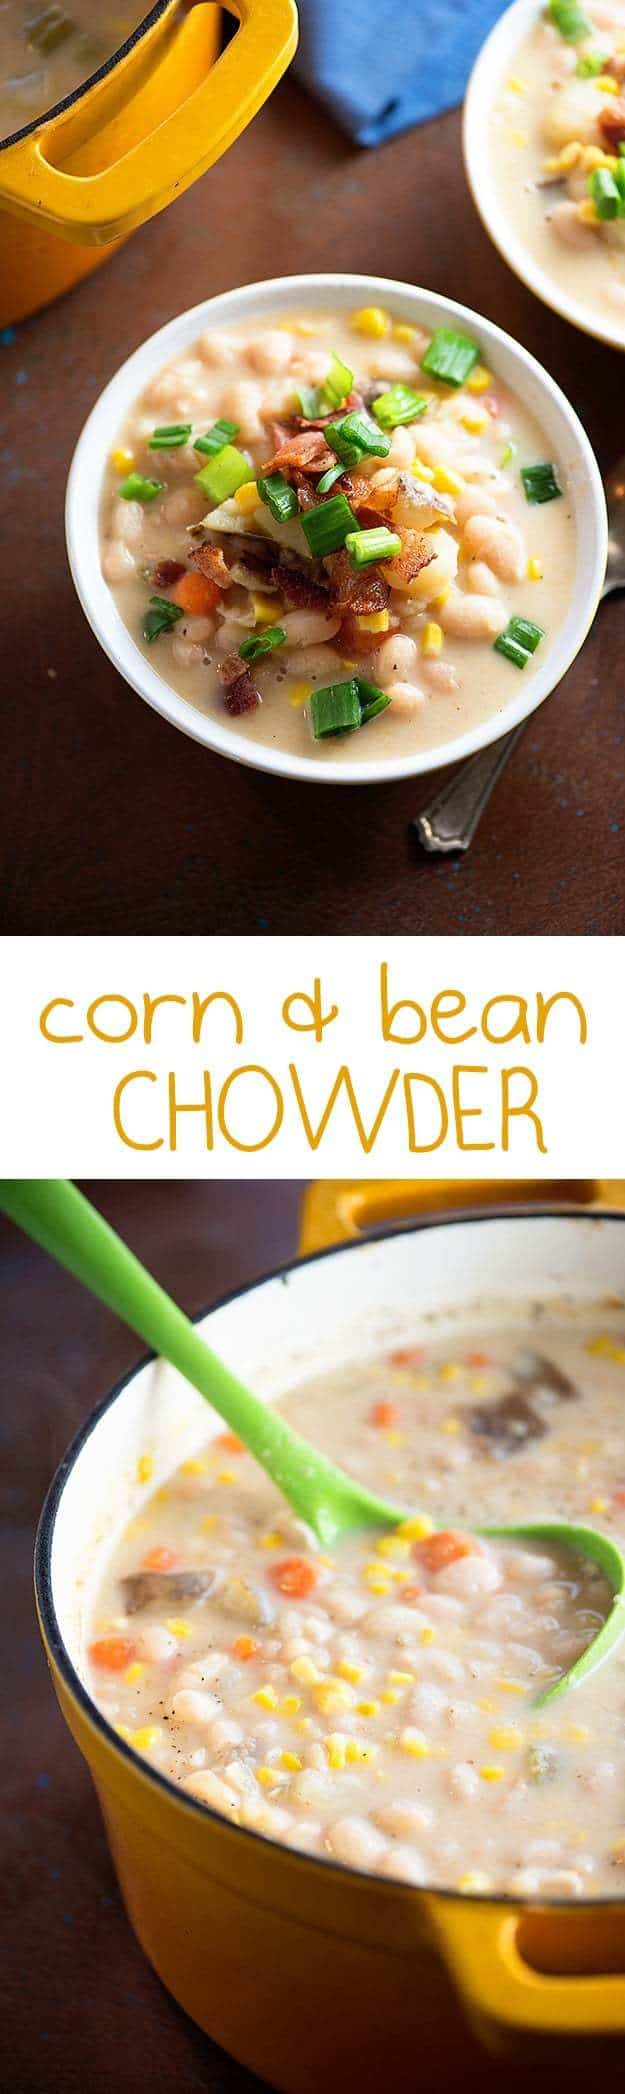 This sweet corn and bean chowder is loaded with fresh veggies and beans! We love this chowder recipe!